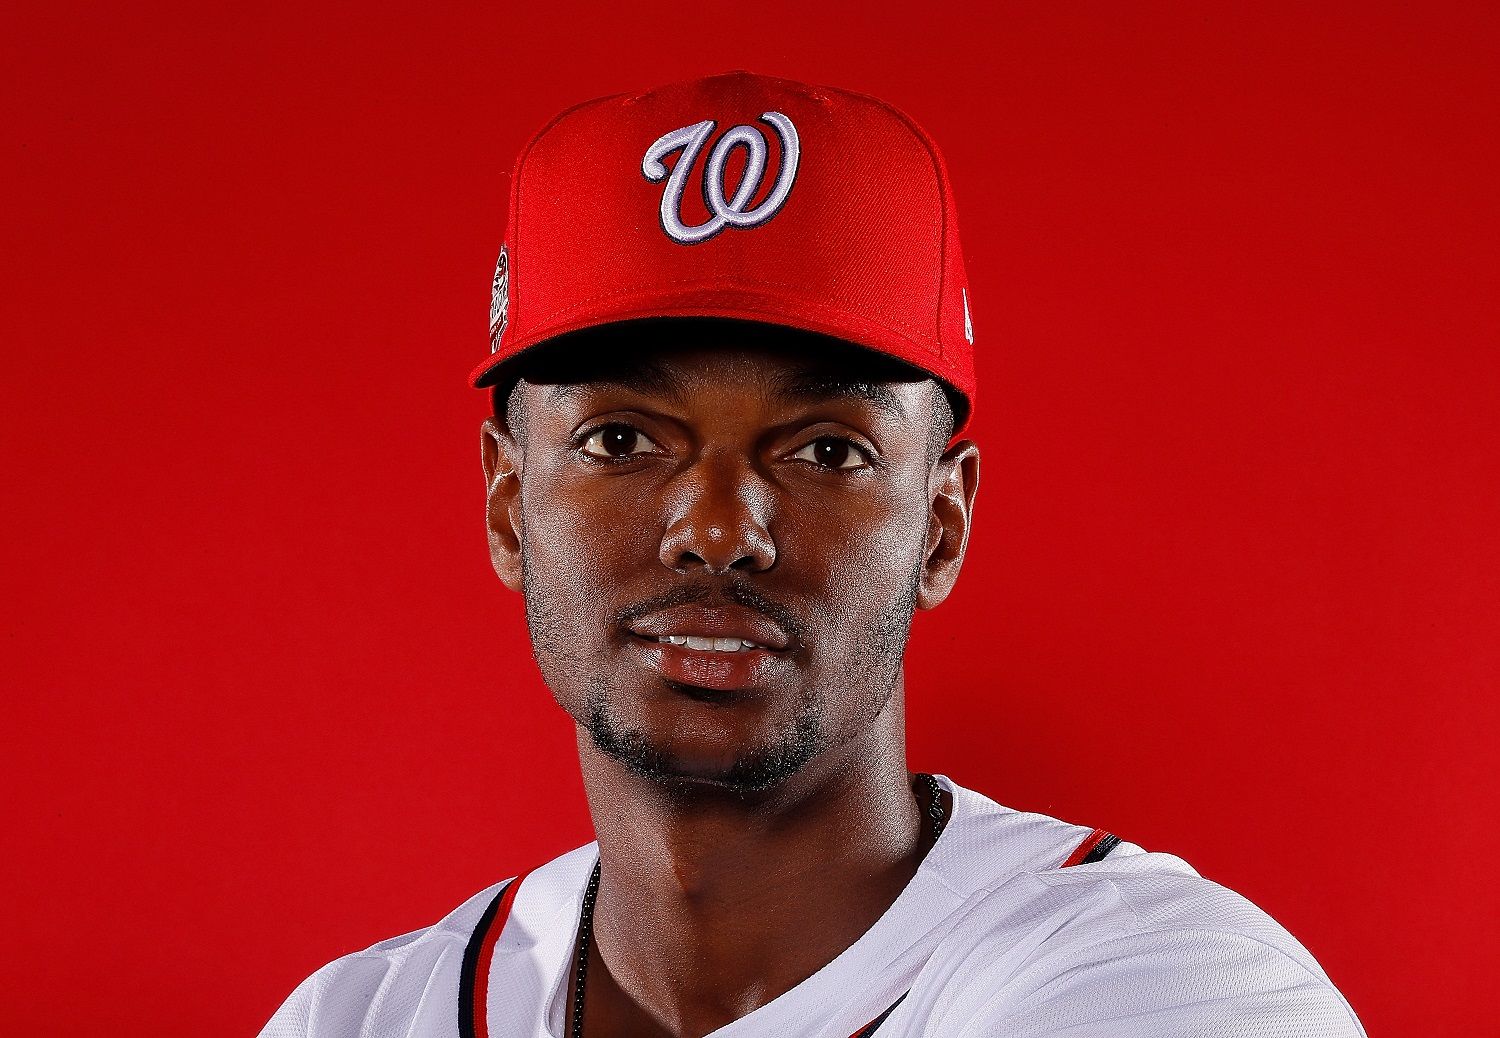 WEST PALM BEACH, FL - FEBRUARY 22:  Michael Taylor #3 of the Washington Nationals poses for a photo during photo days at The Ballpark of the Palm Beaches on February 22, 2018 in West Palm Beach, Florida.  (Photo by Kevin C. Cox/Getty Images)